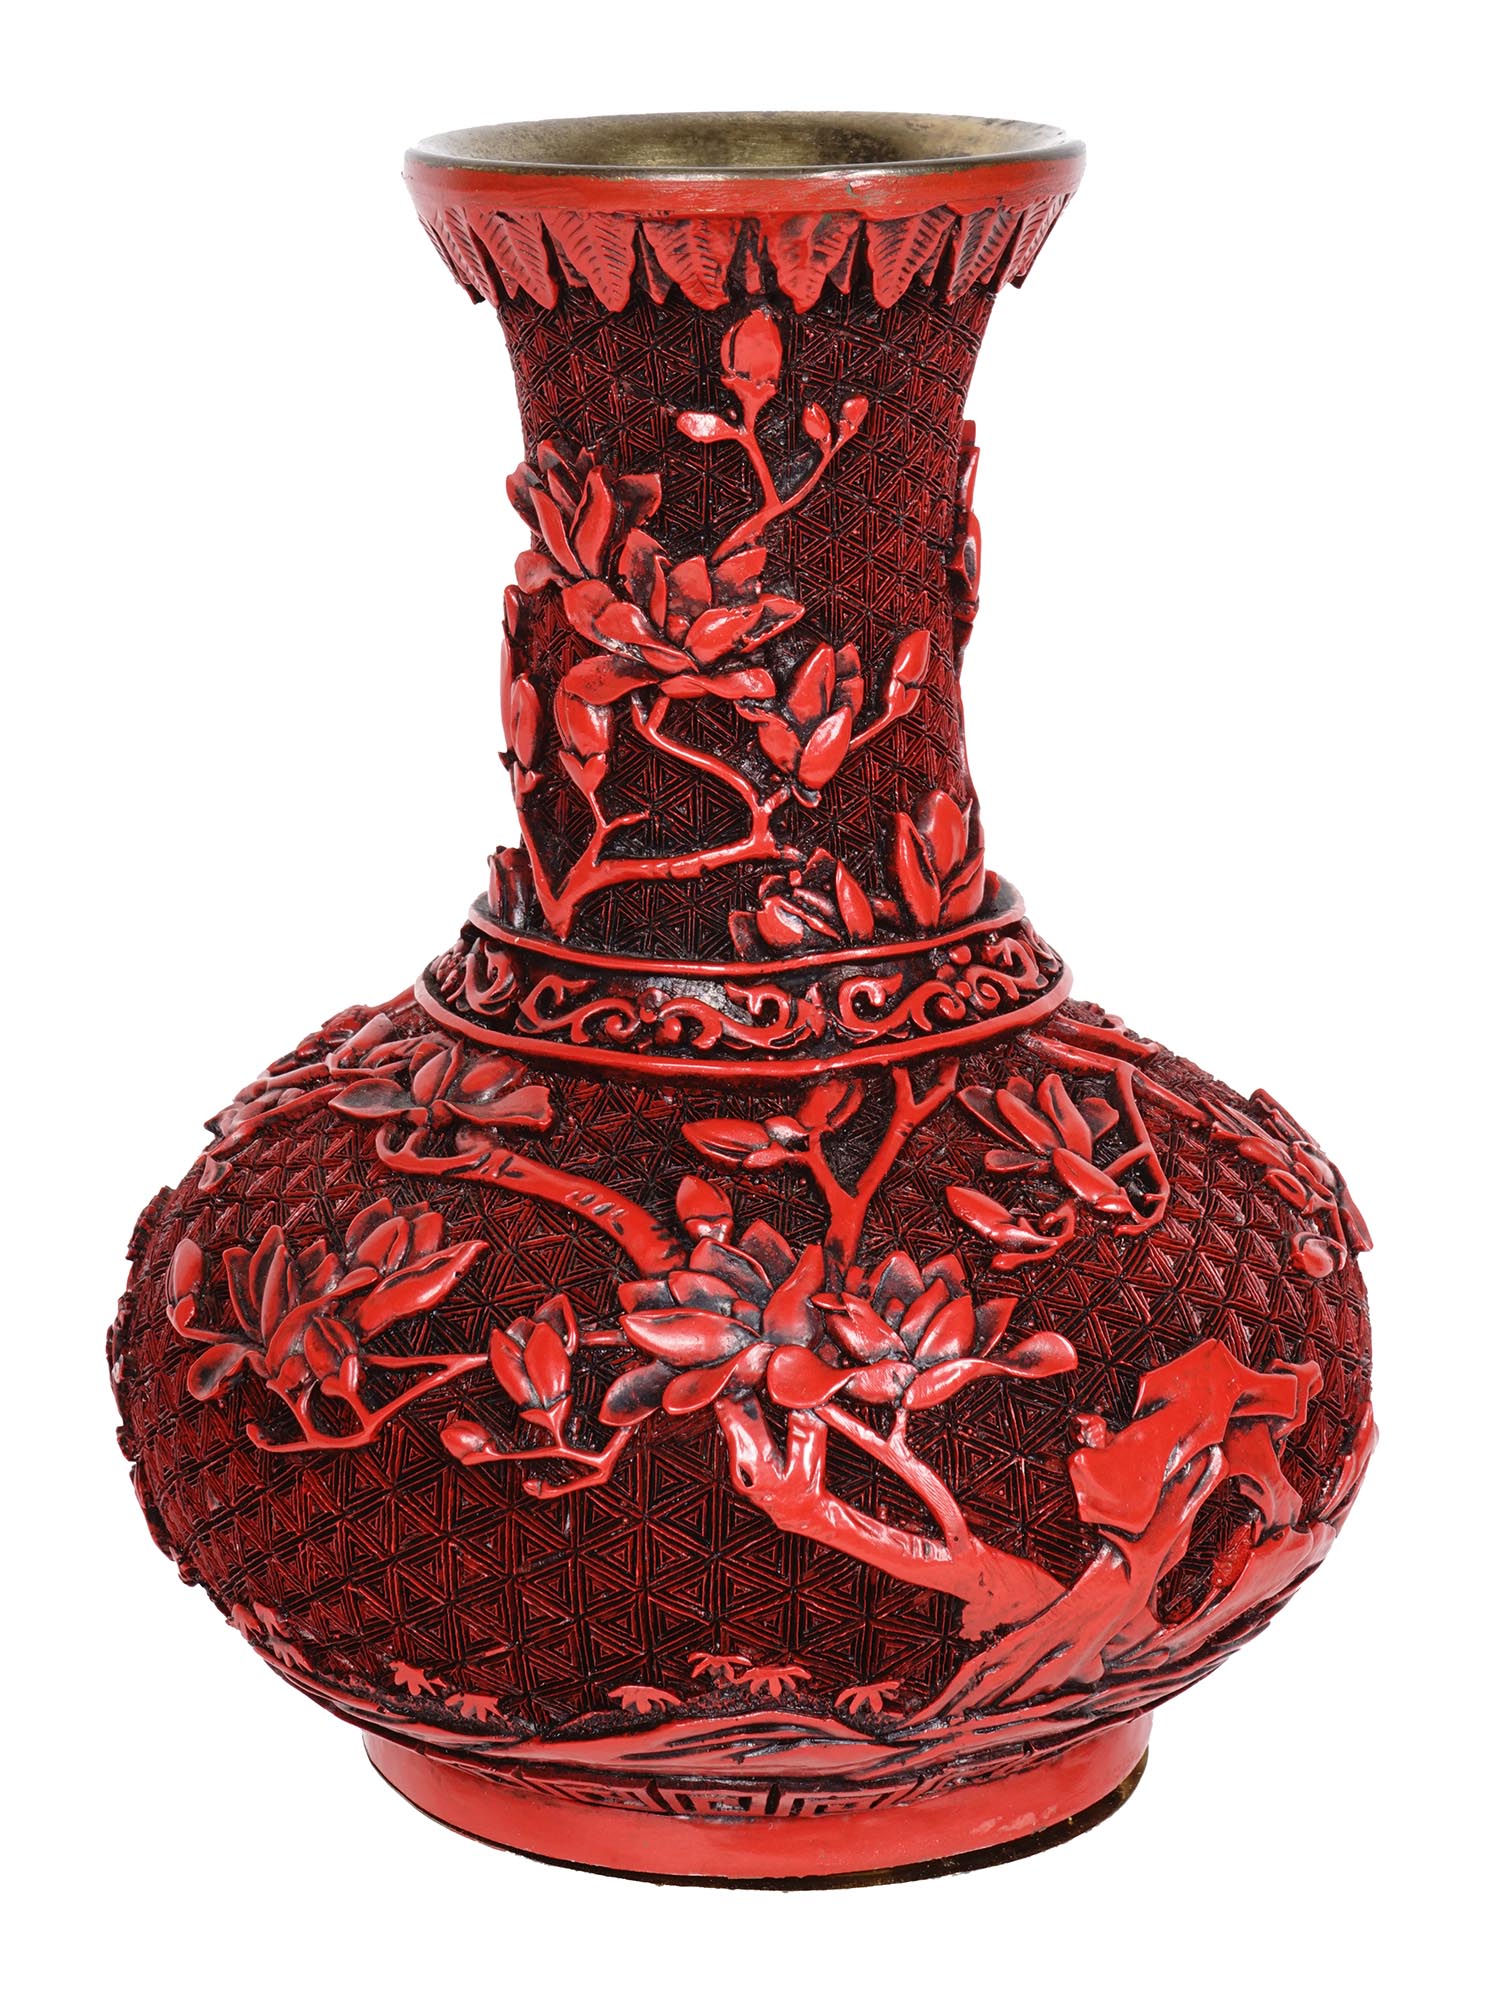 ANTIQUE CHINESE CINNABAR LACQUER BALUSTER VASE PIC-0